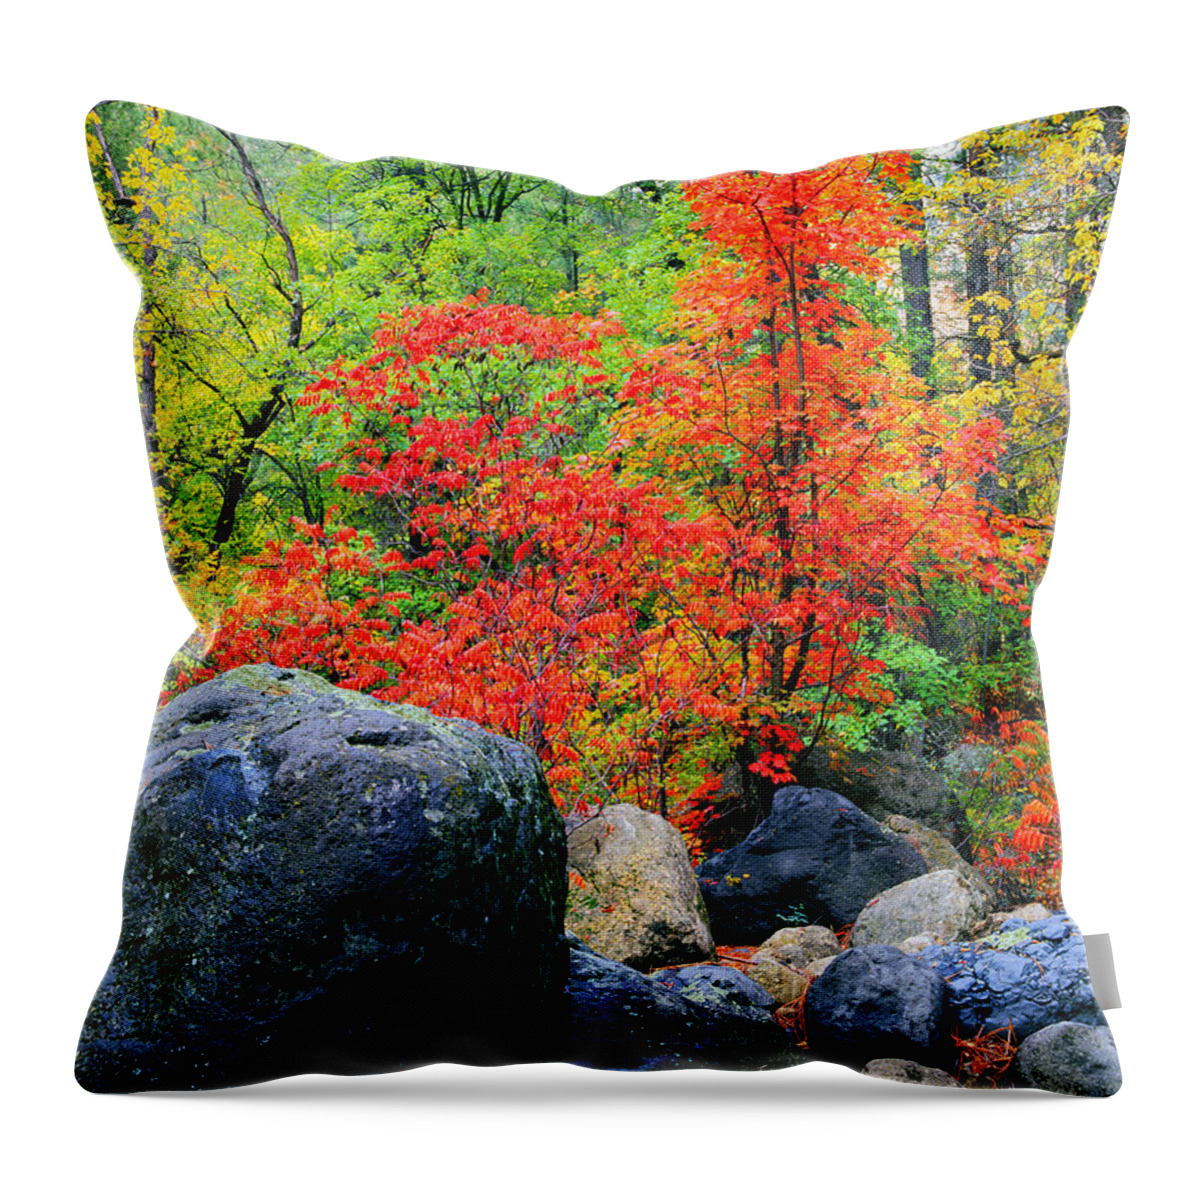 Arizona Throw Pillow featuring the photograph Oak Creek Canyon Red by Frank Houck